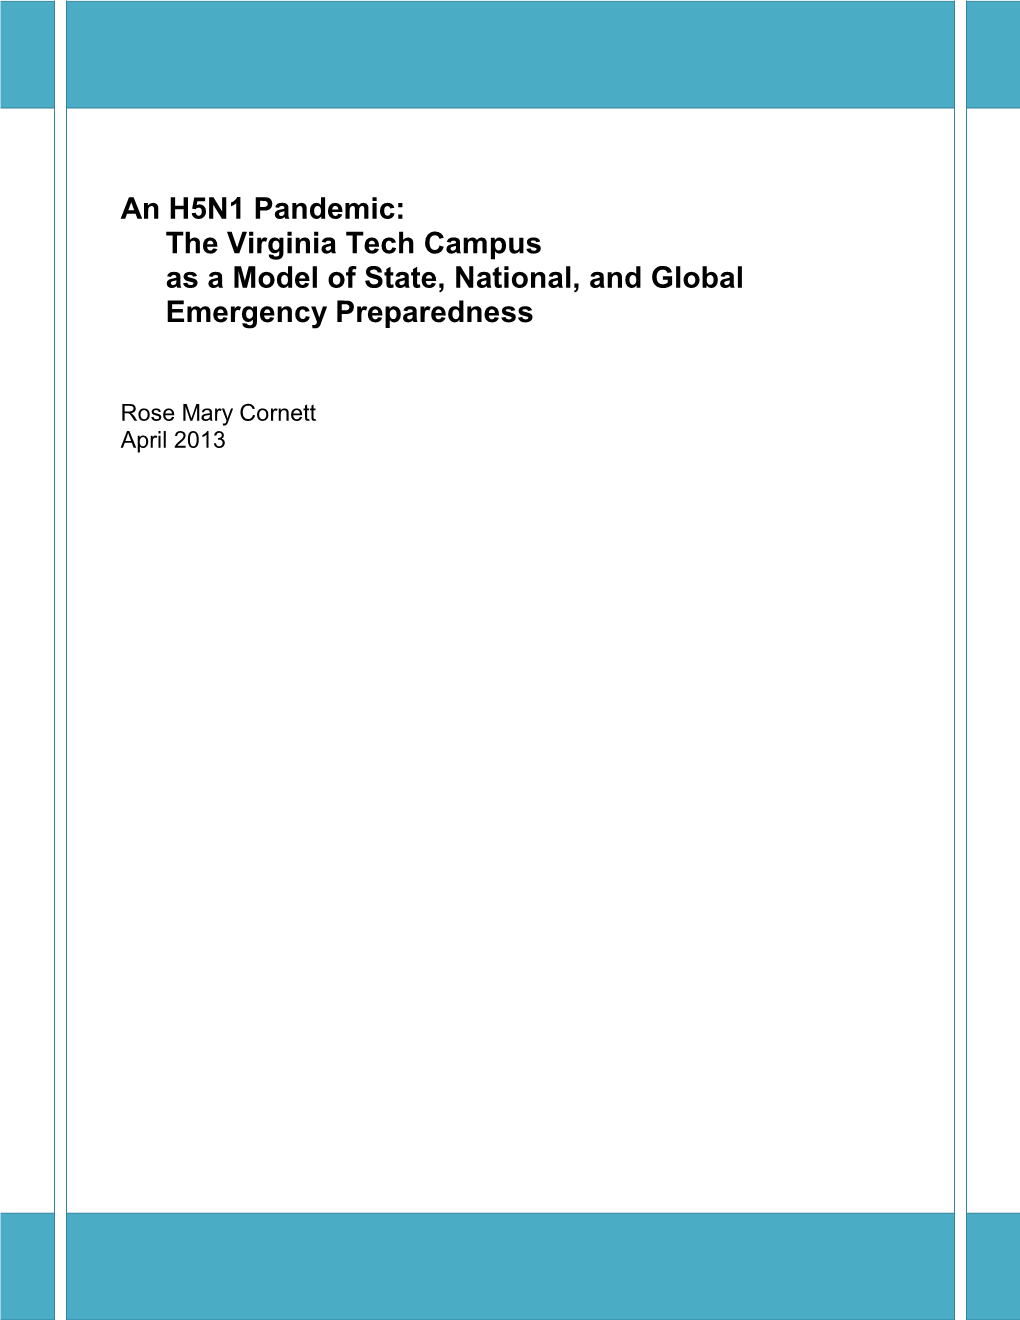 An H5N1 Pandemic: the Virginia Tech Campus As a Model of State, National, and Global Emergency Preparedness